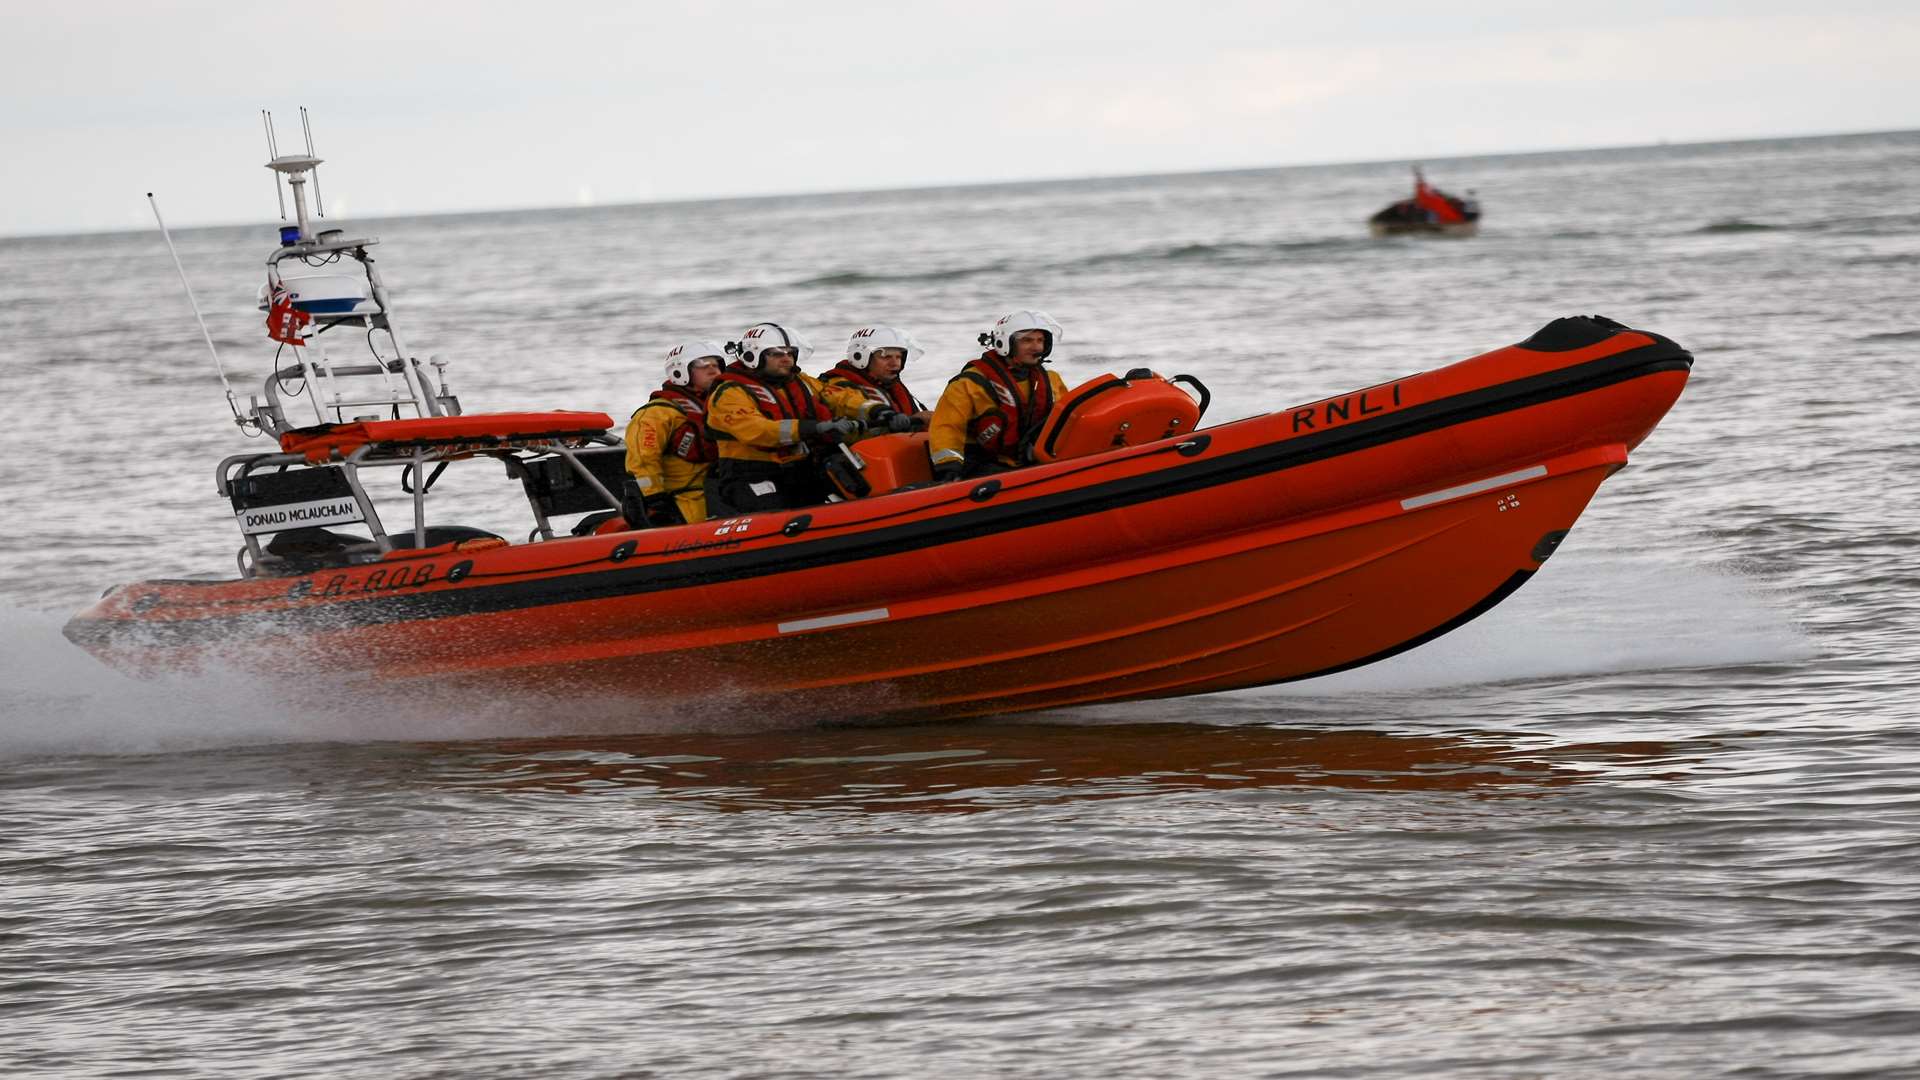 The men were rescued by the coastguard. Library image.